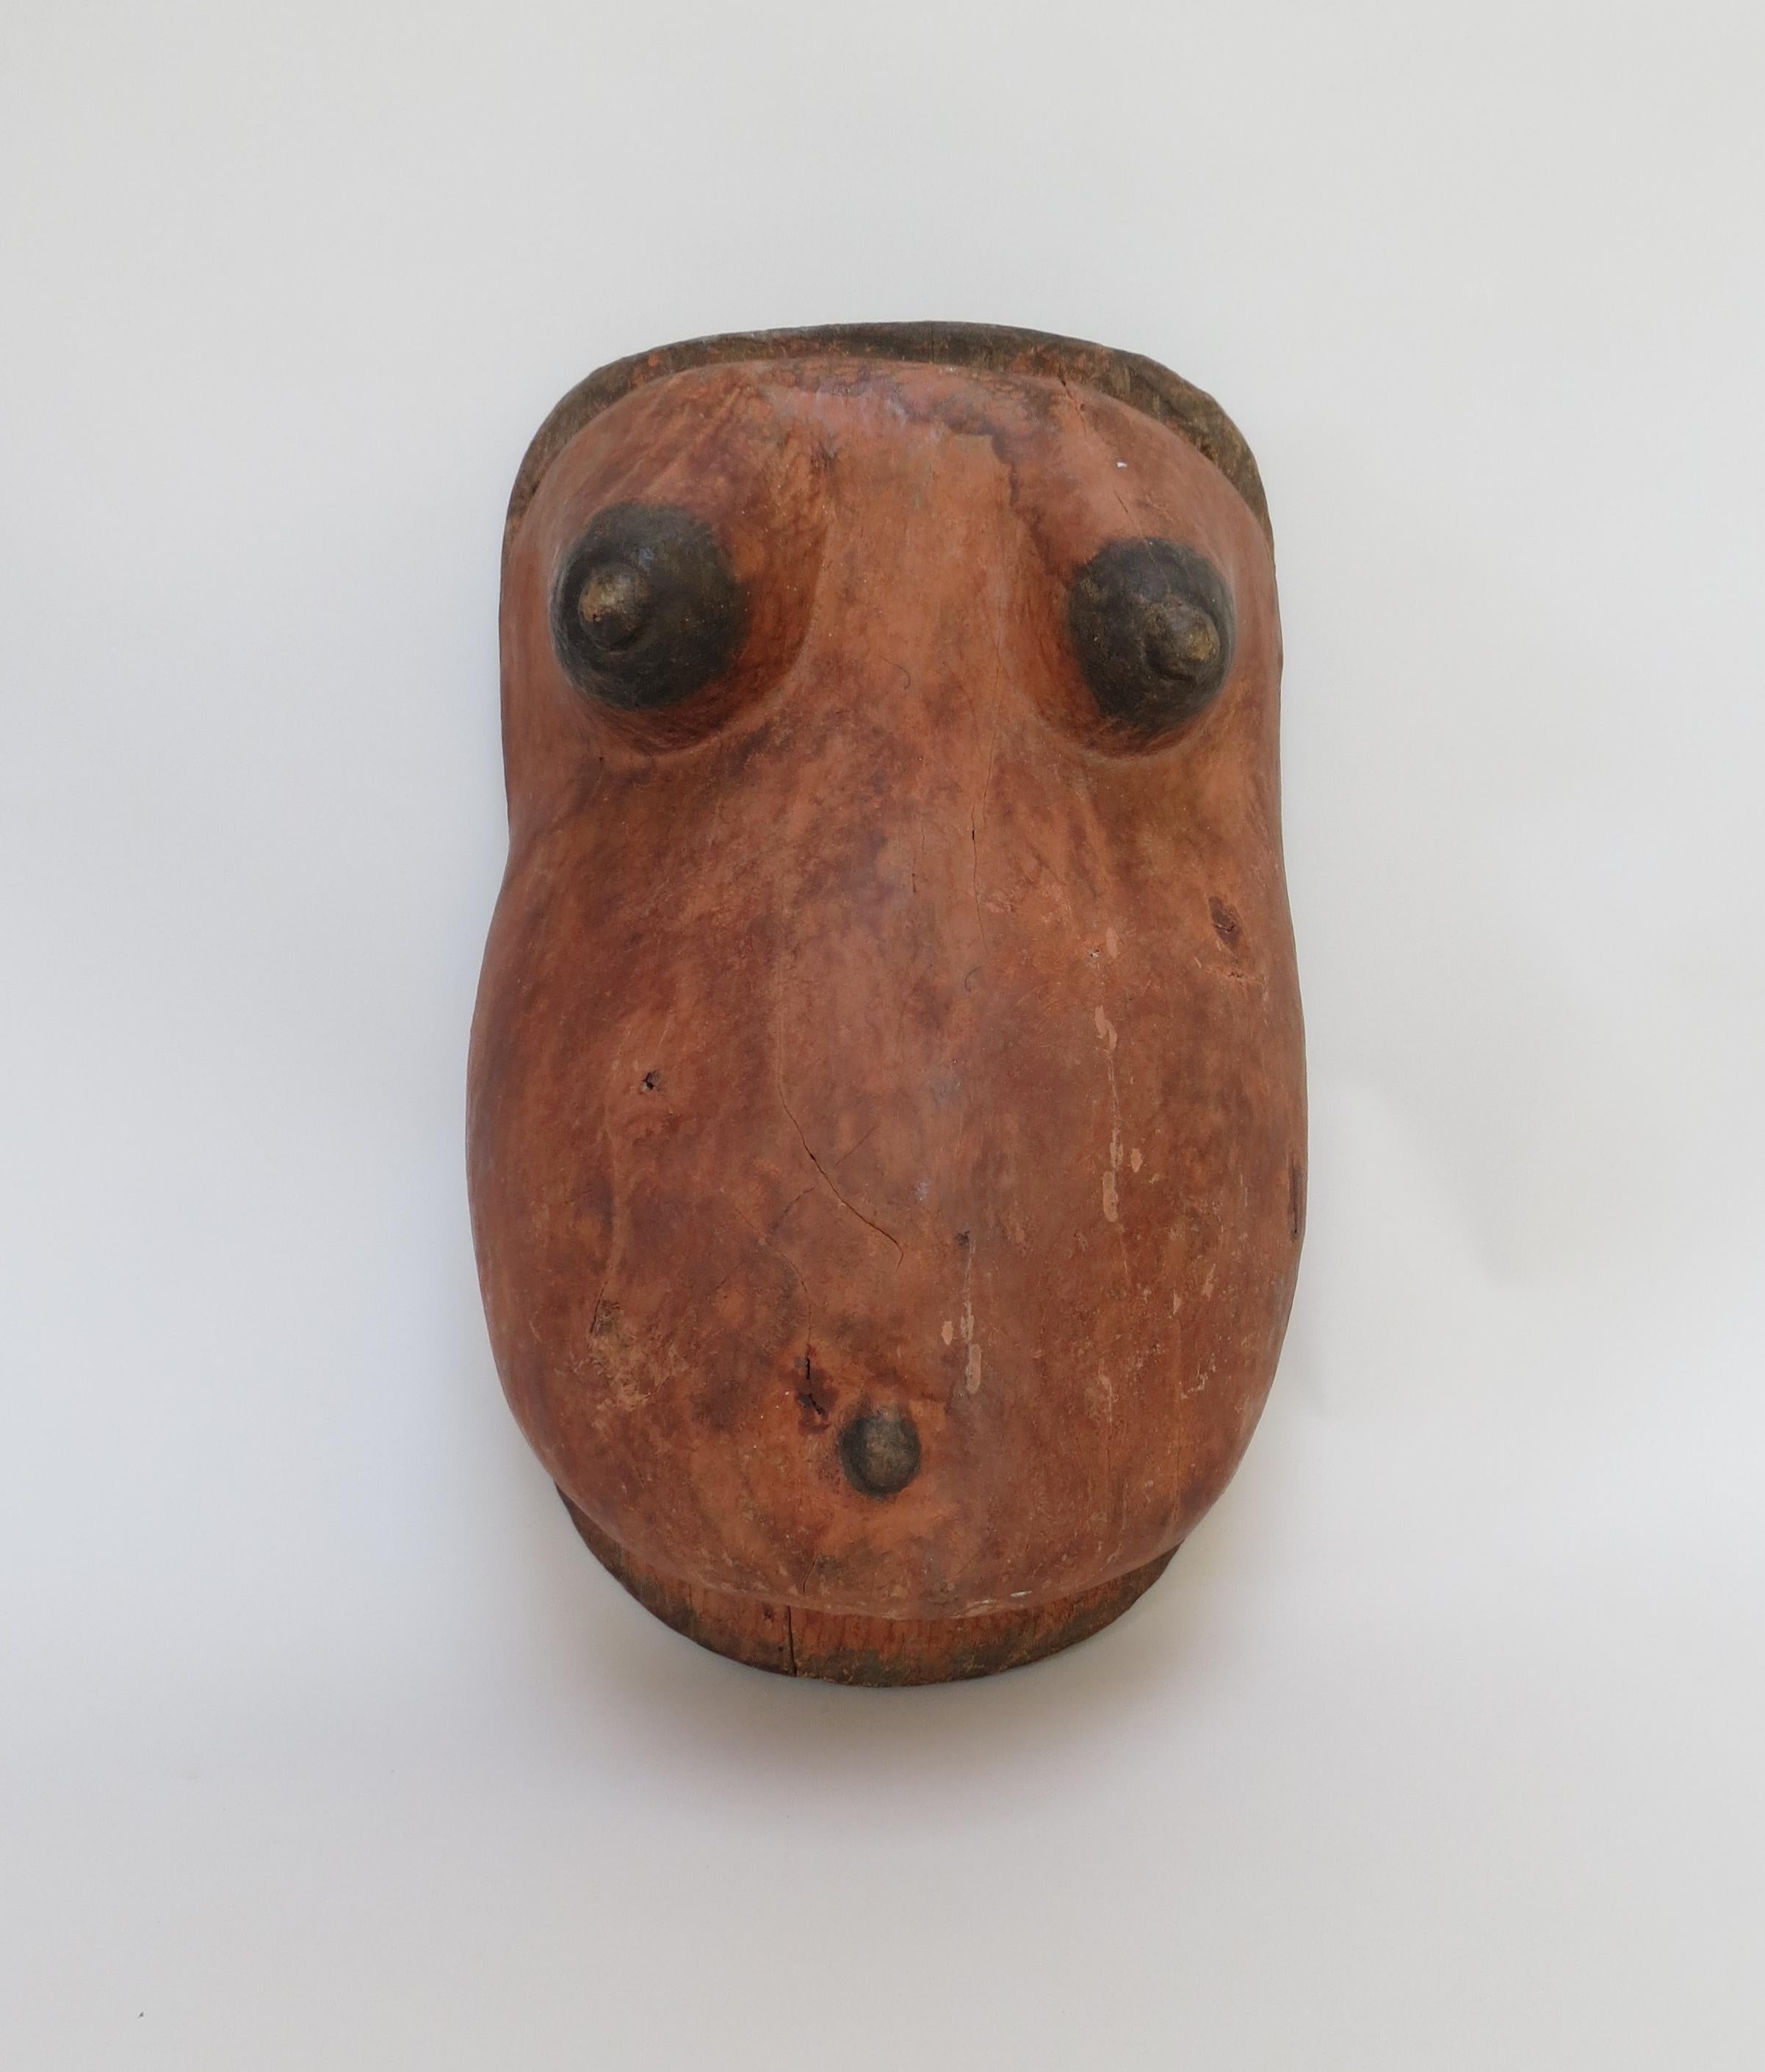 A wonderful fertility body mask dating from the mid-20th century. Hand sculptured from wood and painted in an ochre pigment paint. A great wall hanging.
Fertility Masks were worn by the young males of the Tribe during ceremonies.
Measures: 30cm W